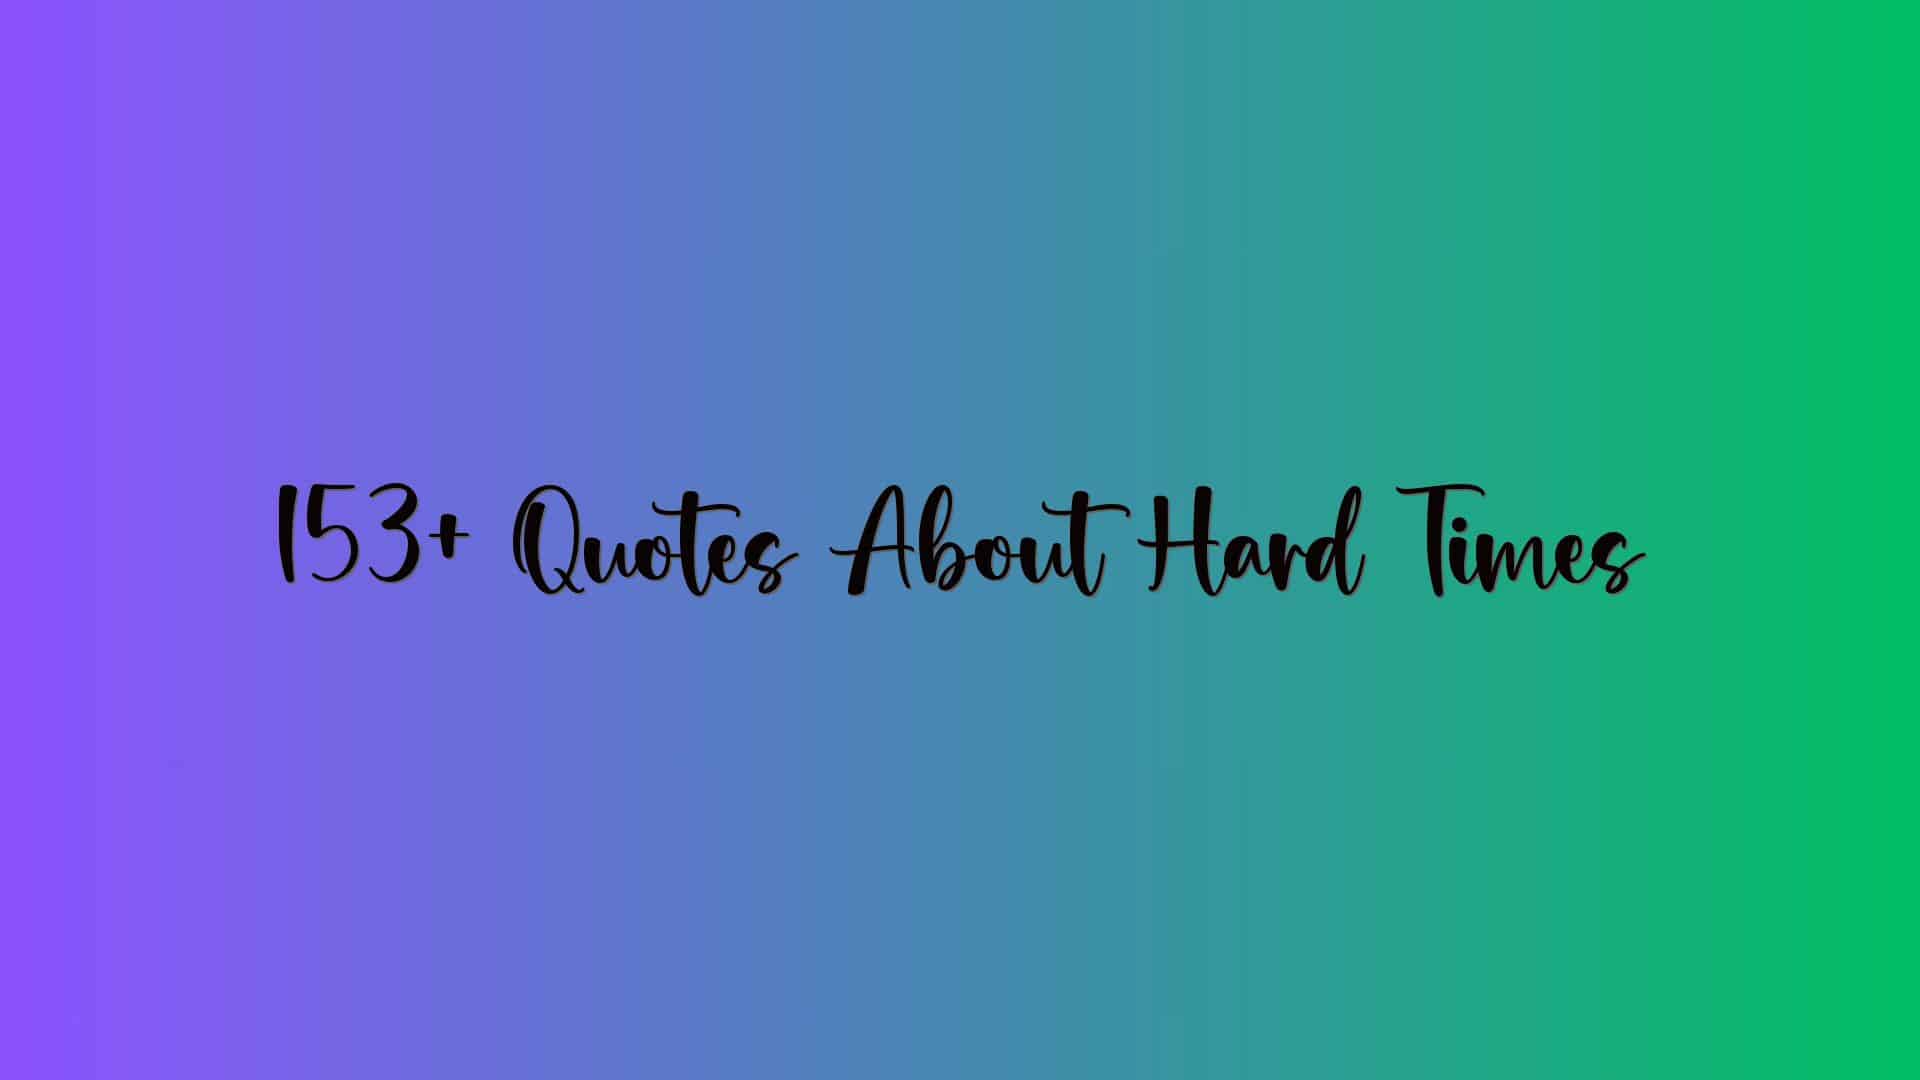 153+ Quotes About Hard Times